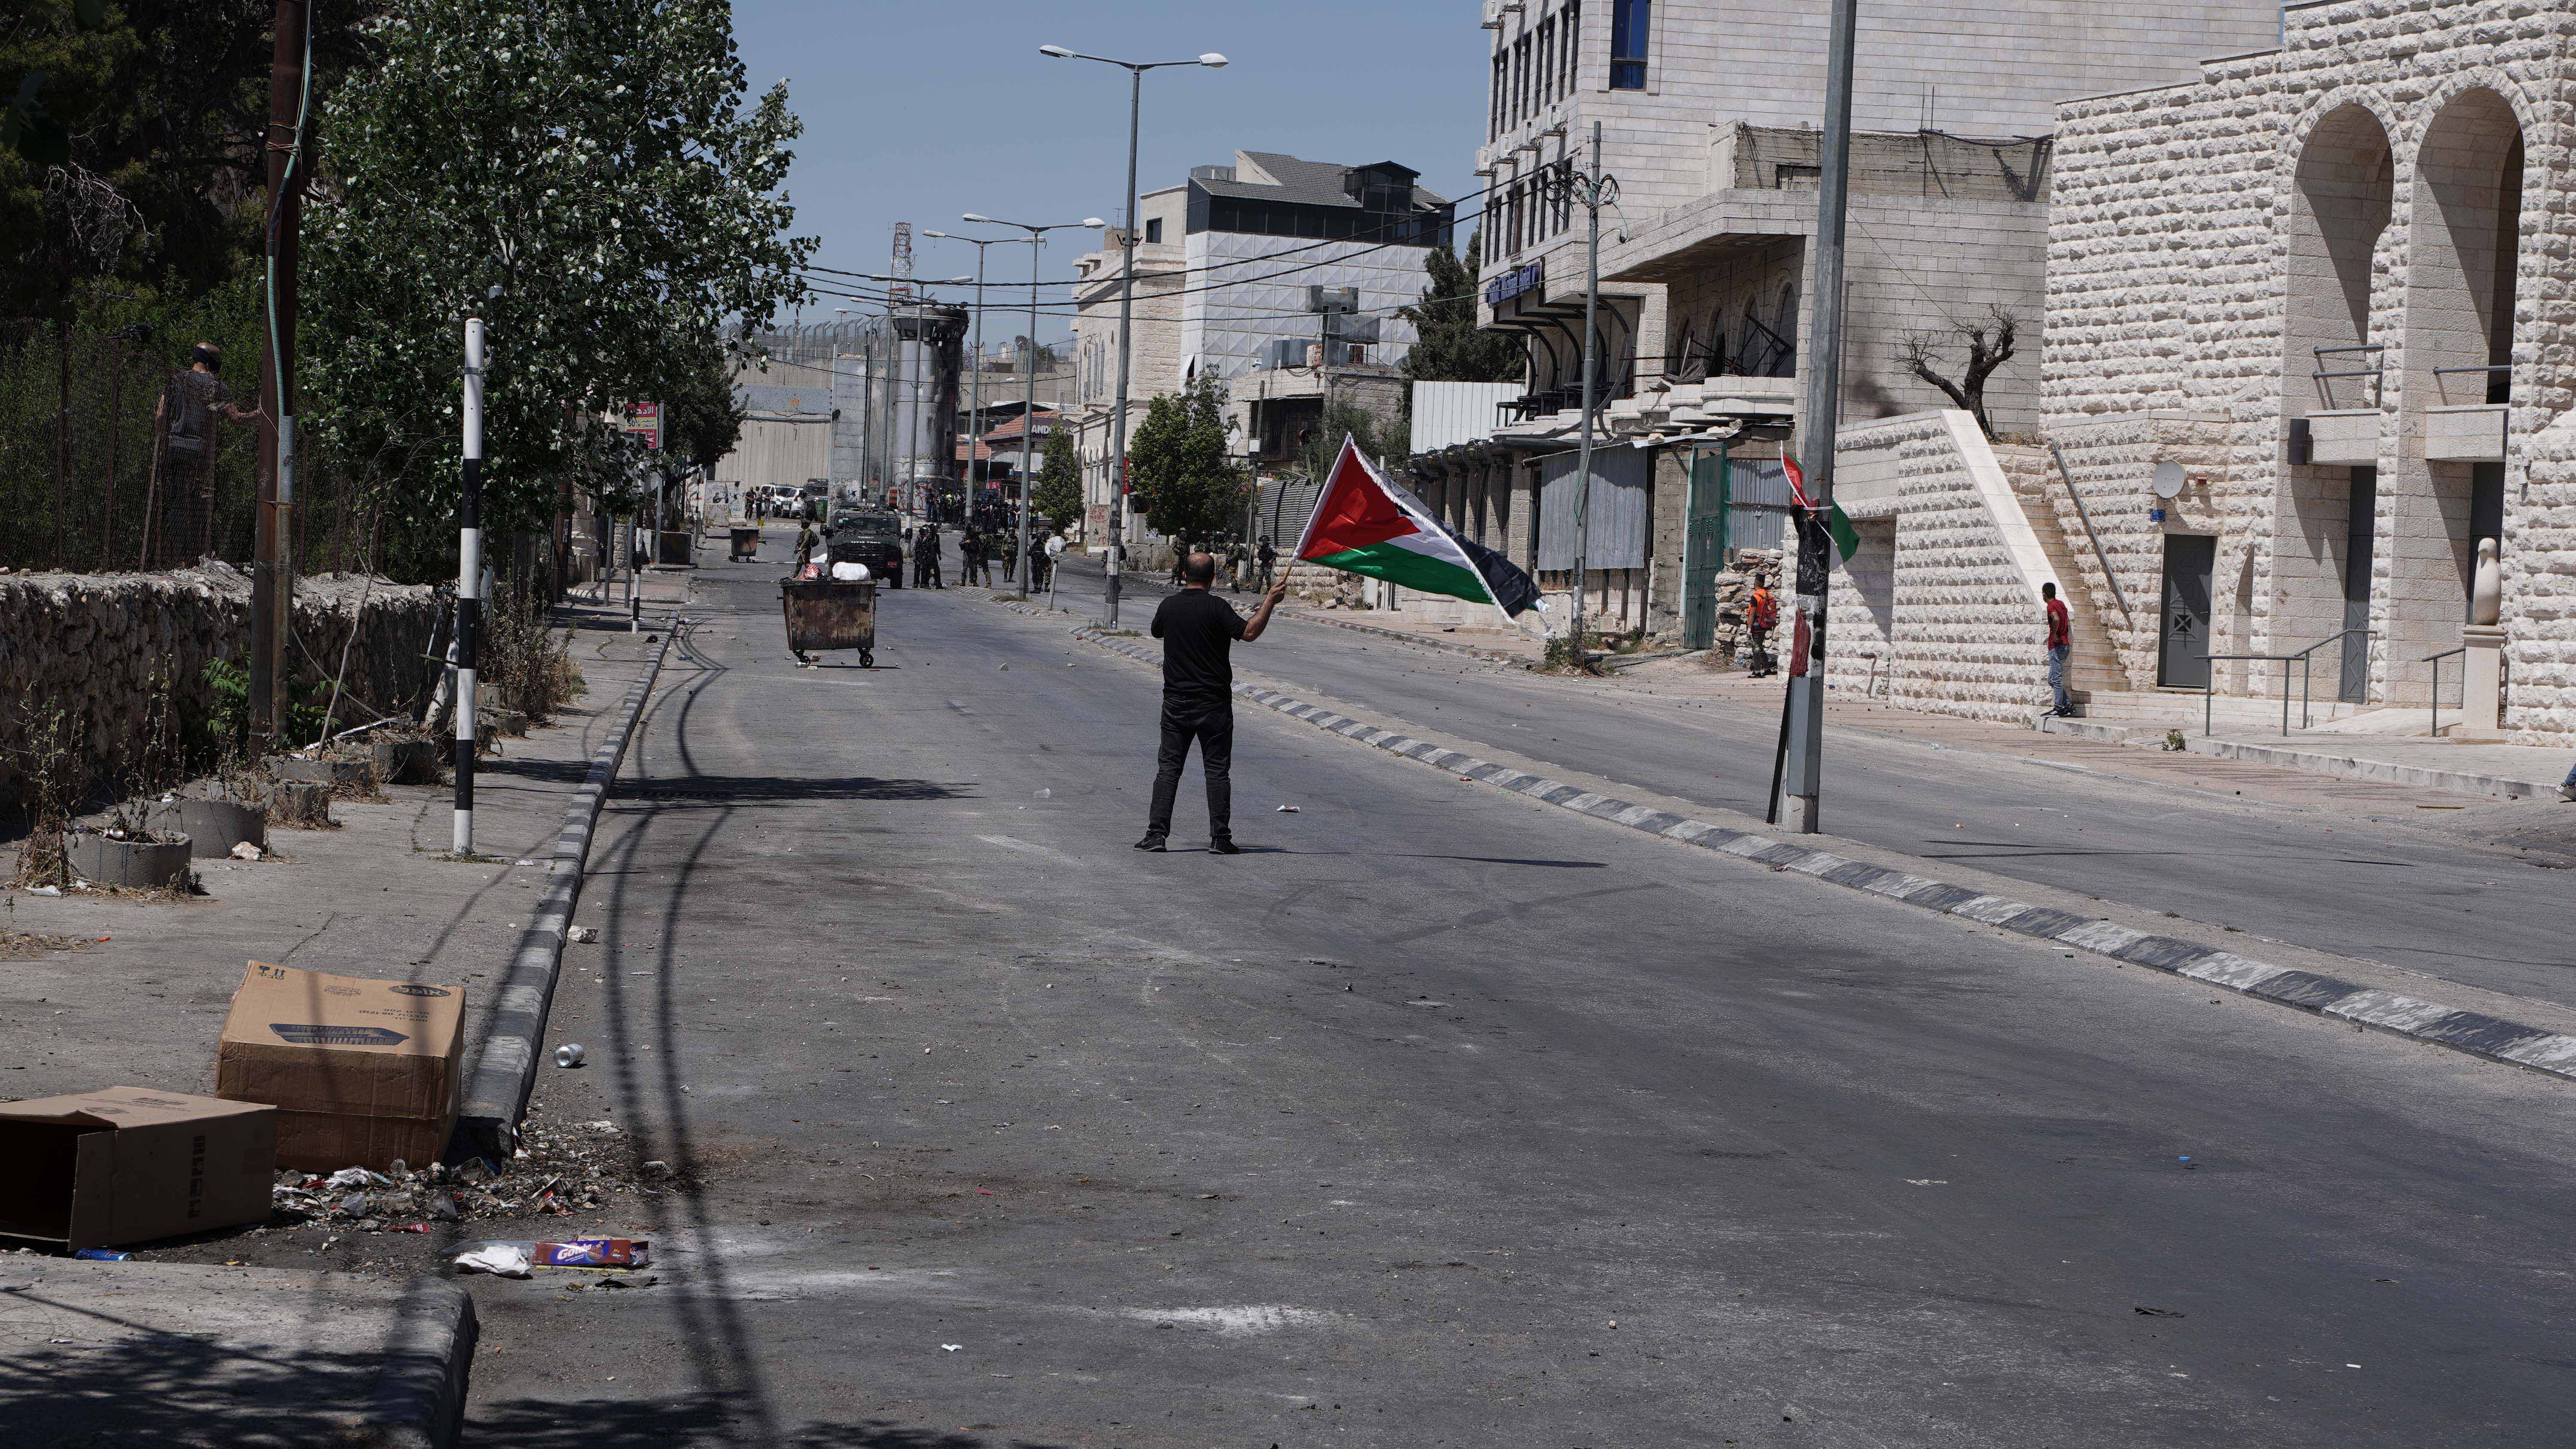 A man waves a Palestinian flag in front of a group of Israeli forces in Bethlehem.